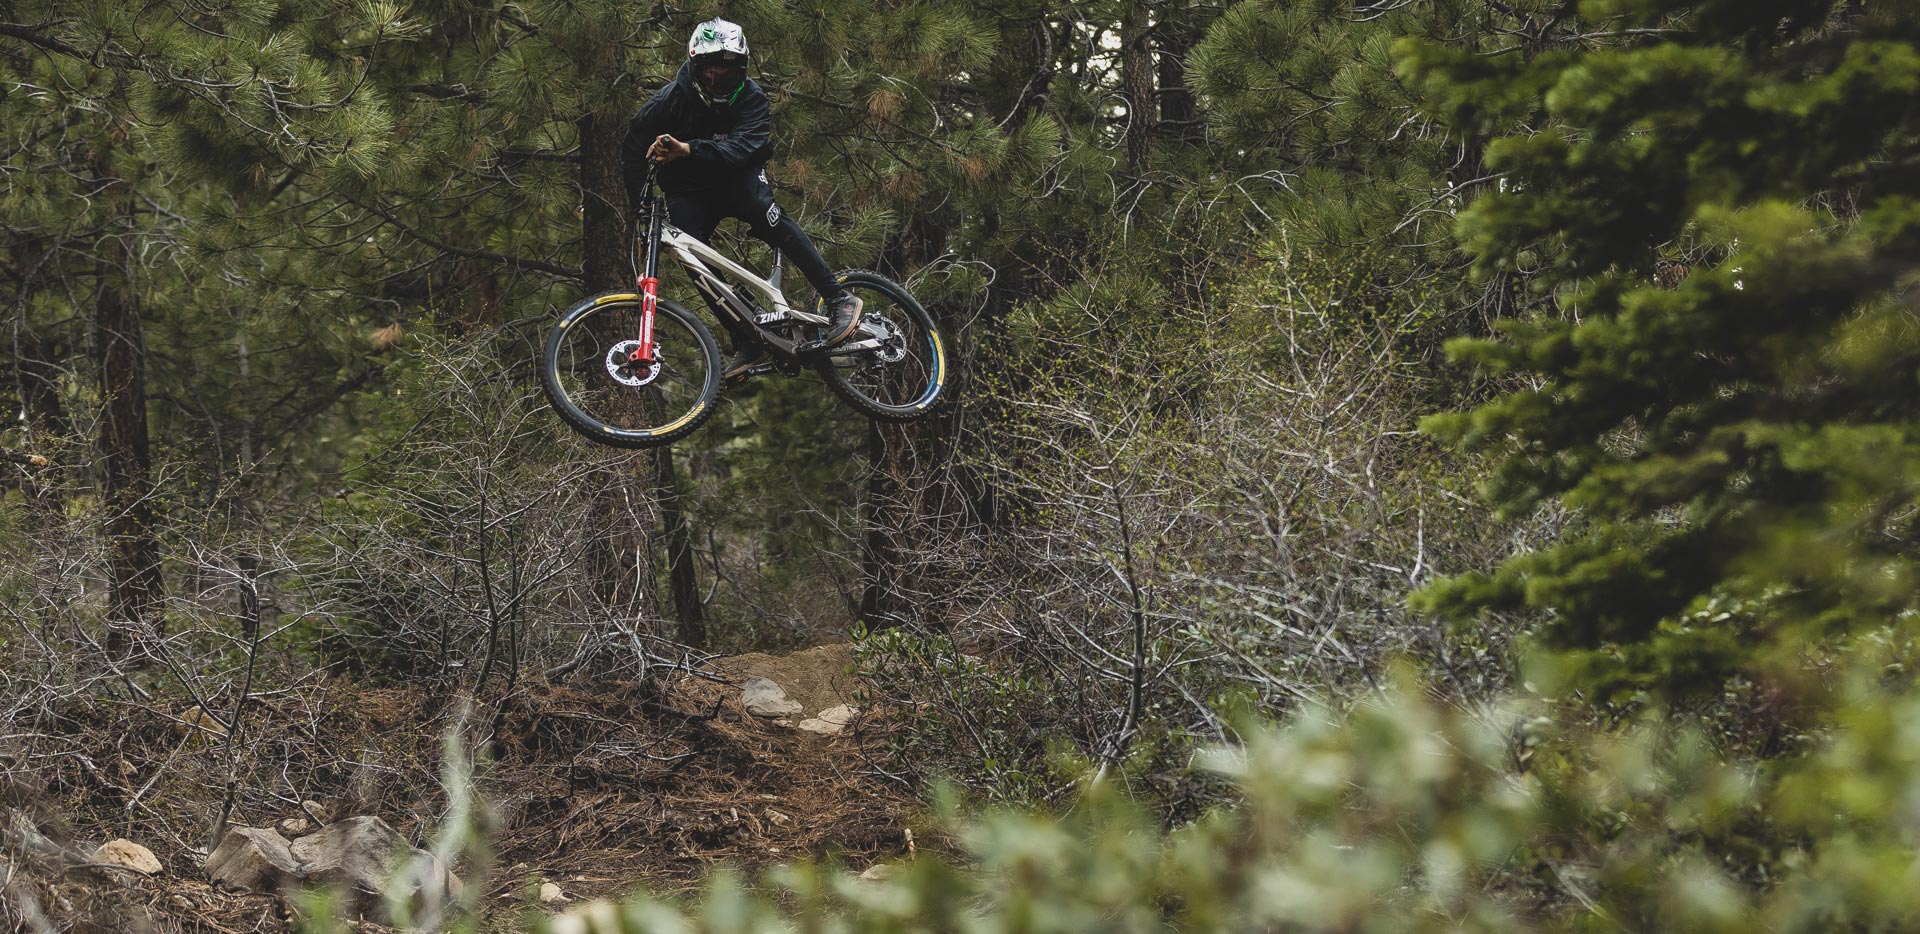 Interview - Cam Zink: Zink has been hard at work on his 170-acre property, which is now home to freeride lines and downhill tracks. Photo by Ryan Cleek